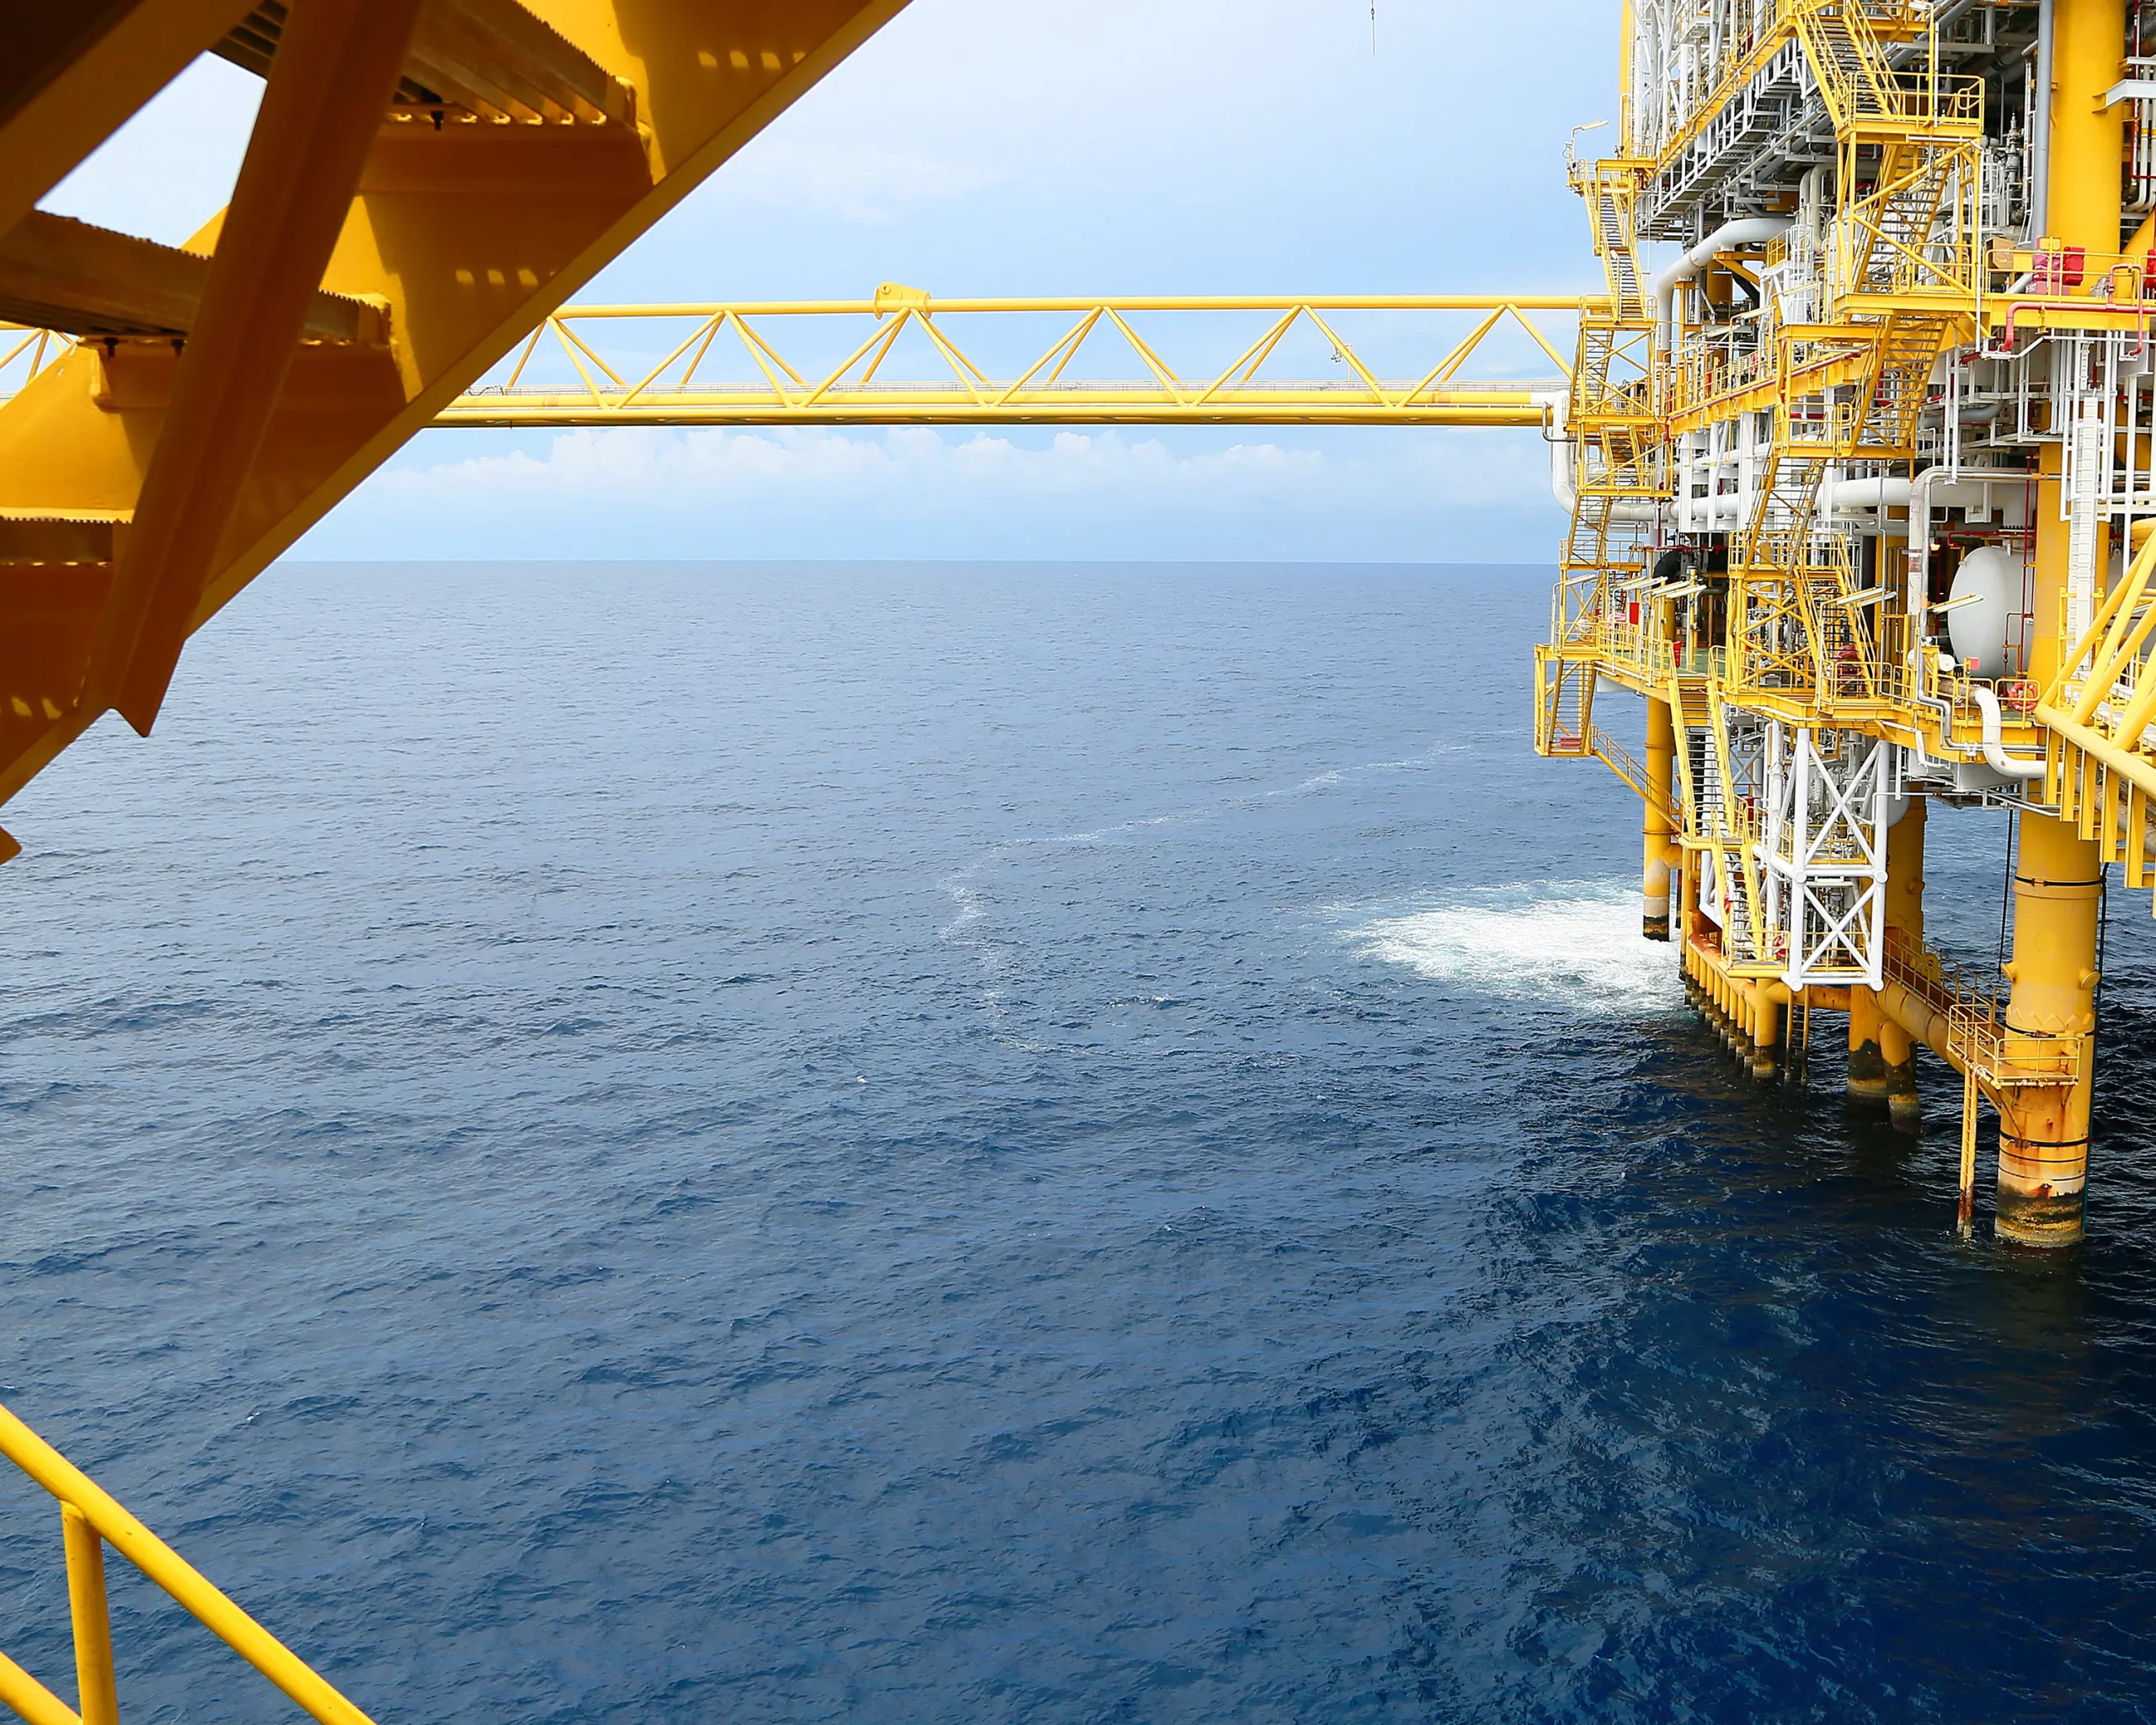 Offshore platforms extract and process oil and gas from offshore reserves. They require technical expertise and hard work in drilling, production, and maintenance. The operation process involves manual and auto functions controlled from a central control room